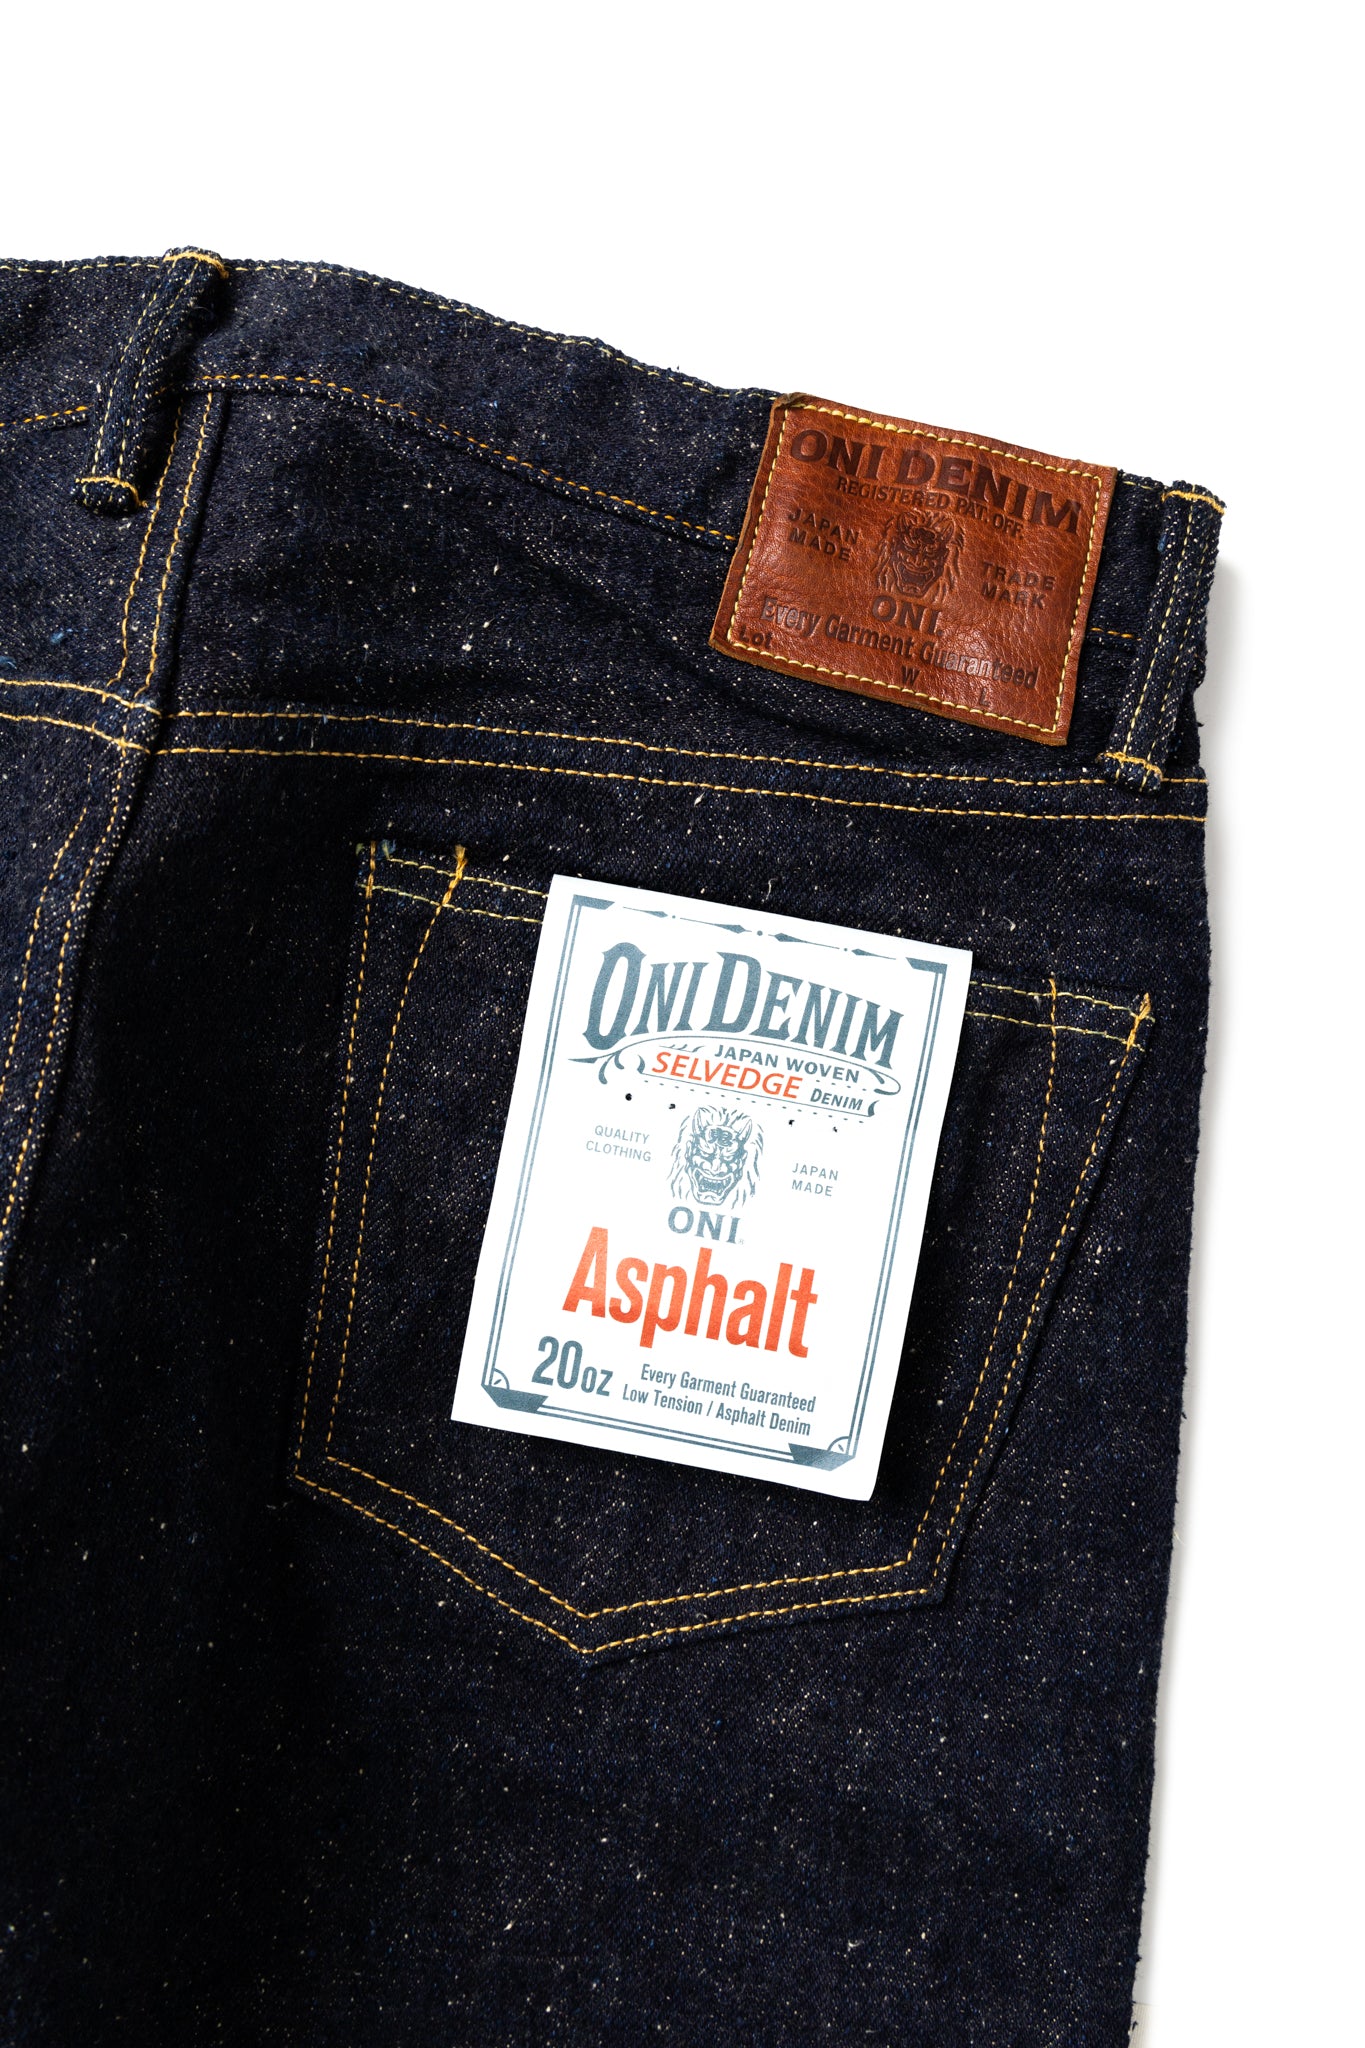 Oni Denim, legends of denim, new heavyweight selvedge- the Asphalt. Extreme slubbiness and neppy construction, weighing in at 20oz in a Relax Tapered fit. A dark indigo denim that is rugged and woven with low tension, using specially twisted thick yarns. Oni Original Japanese Selvedge denim featuring a cow leather patch. One Wash. Special edition for Blue in Green featuring plain rear pockets. Made in Japan. Model is 6'3 wearing a size 34. Unisex. 100% Cotton. 